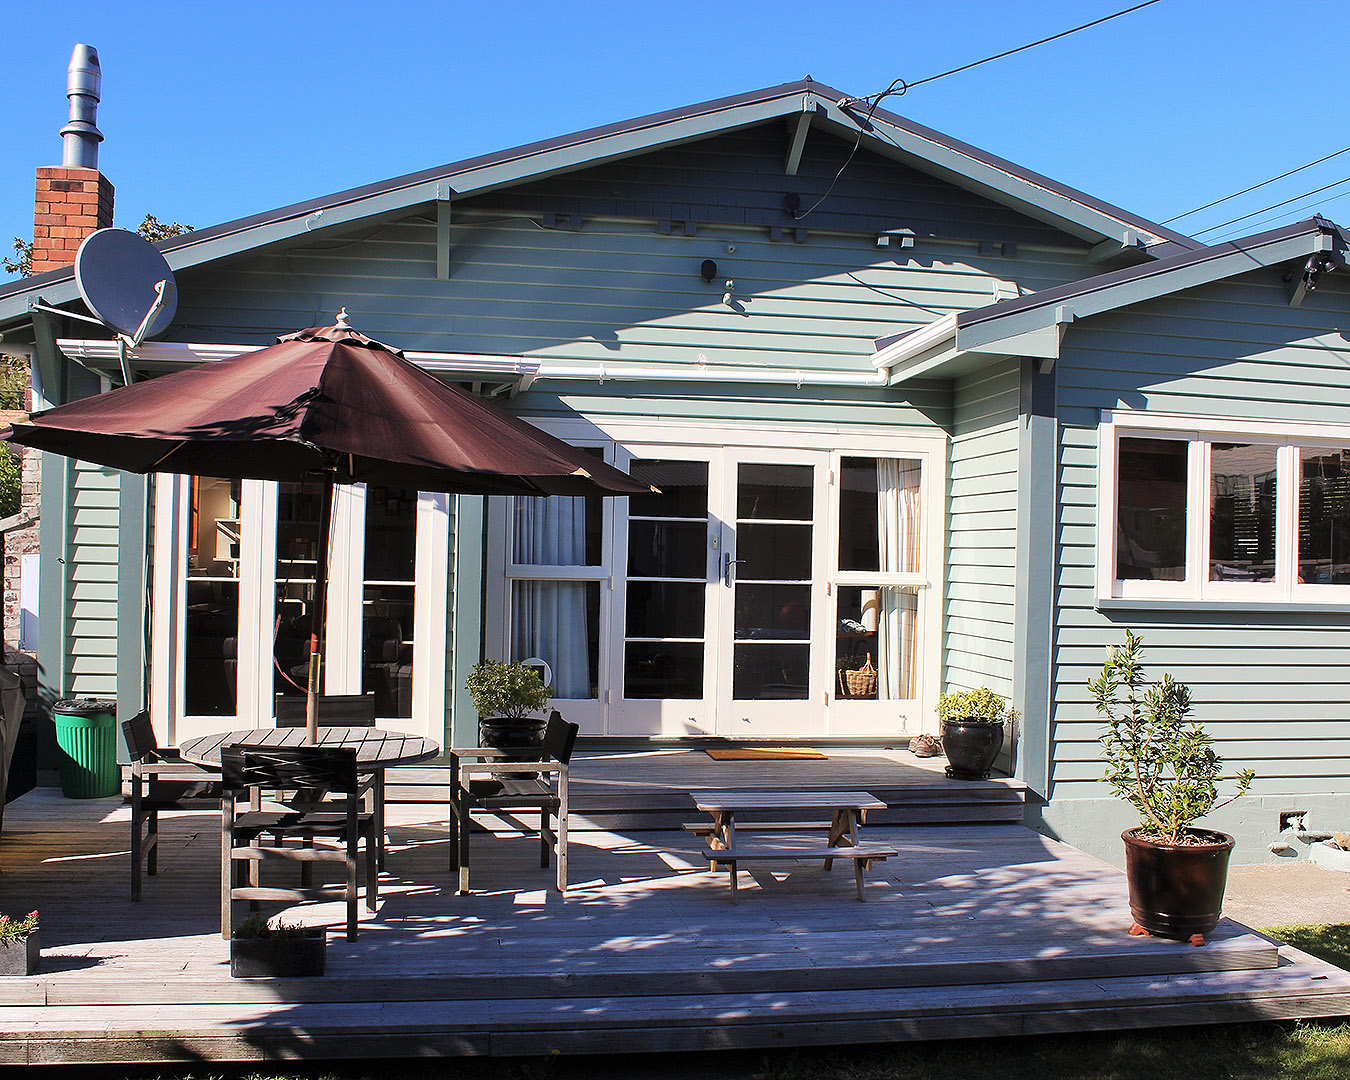 The exterior of Little White Beach Cabin shows a lovely wooden villa, and is one of the best airbnbs in Wellington.